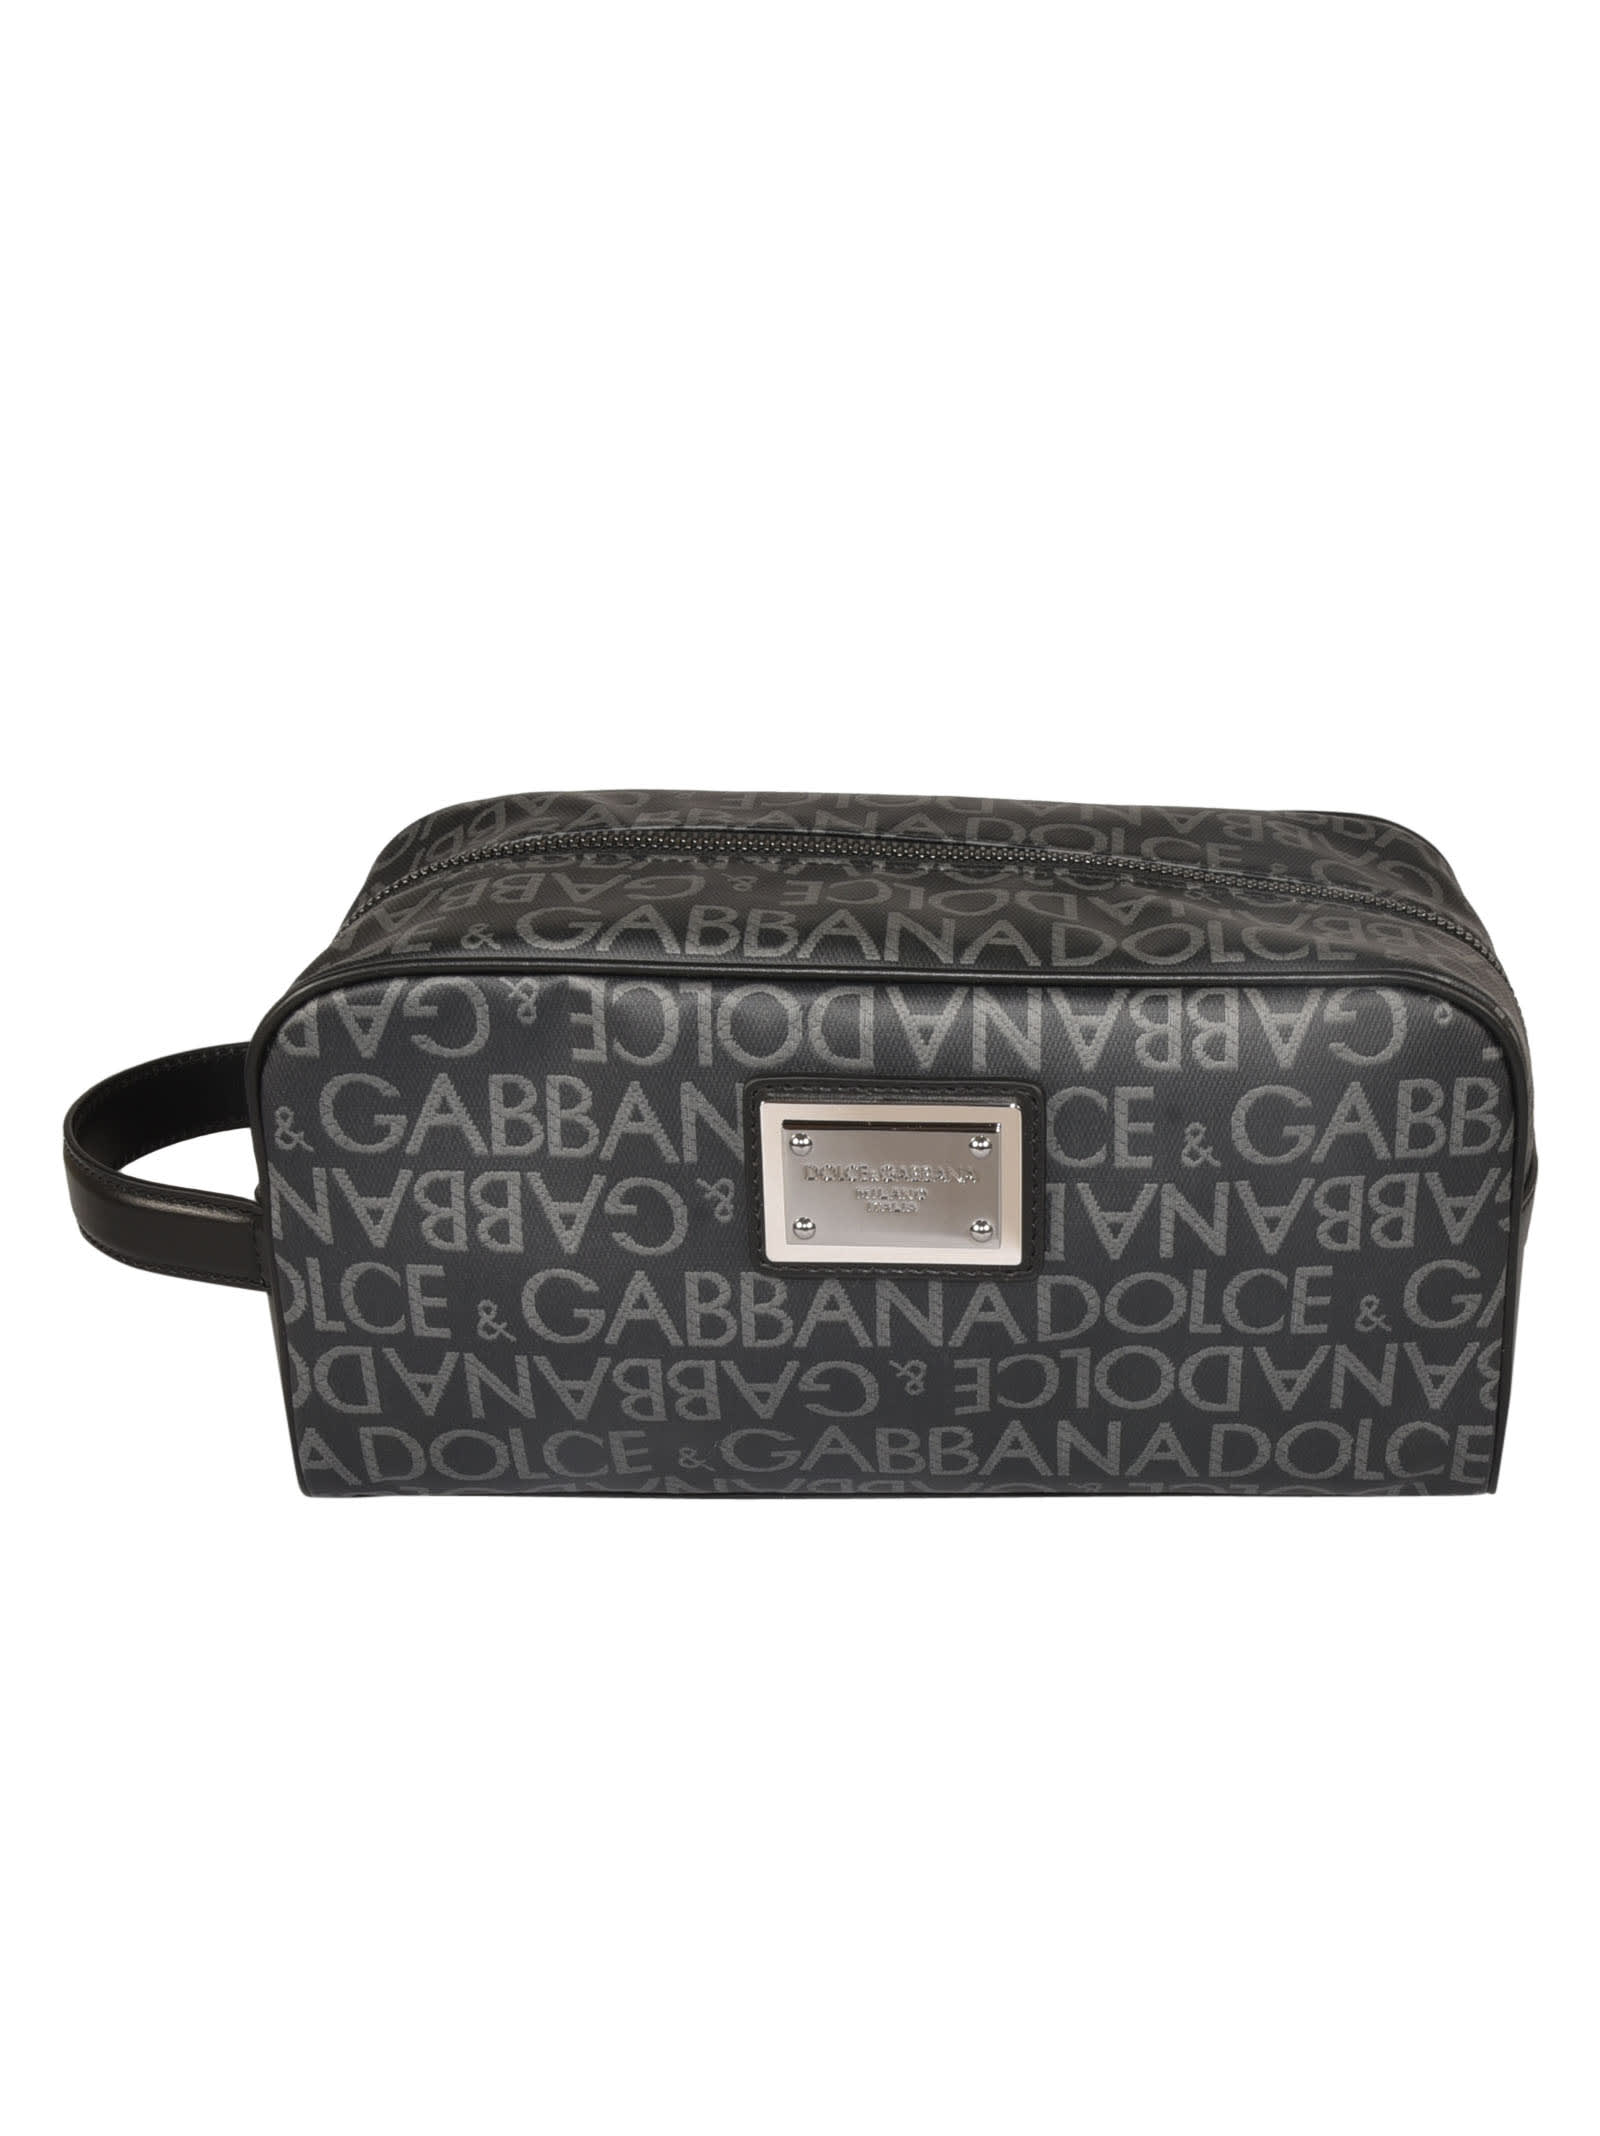 Dolce & Gabbana Logo All-over Top Zip Pouch In Black